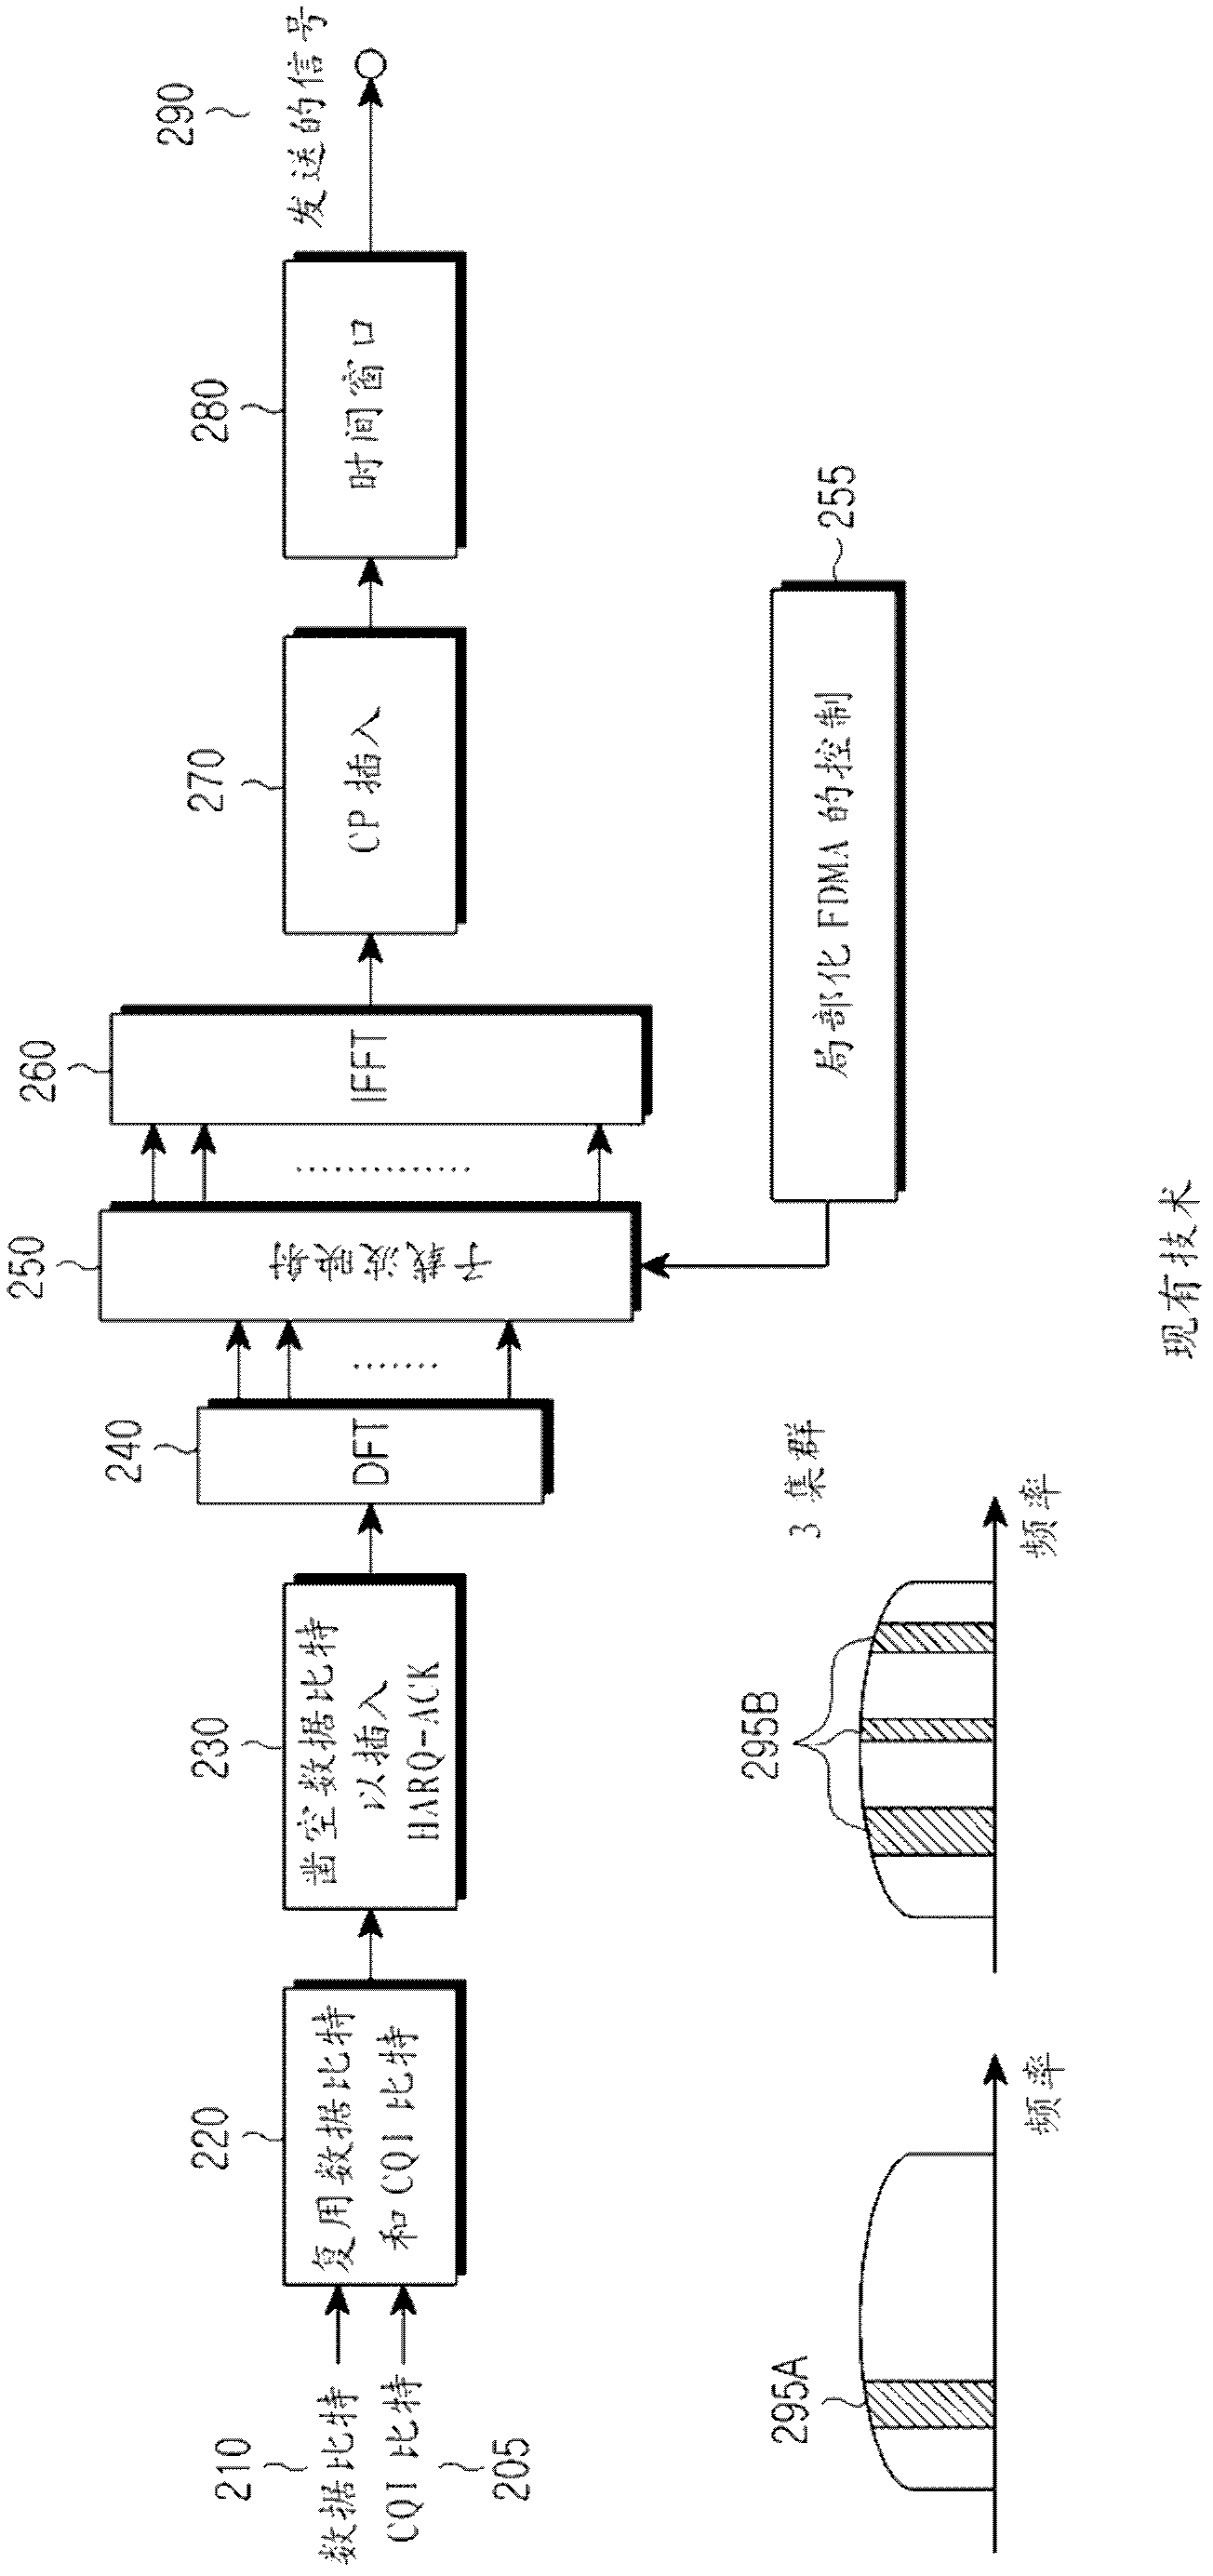 Uplink transmission power control in multi-carrier communication systems